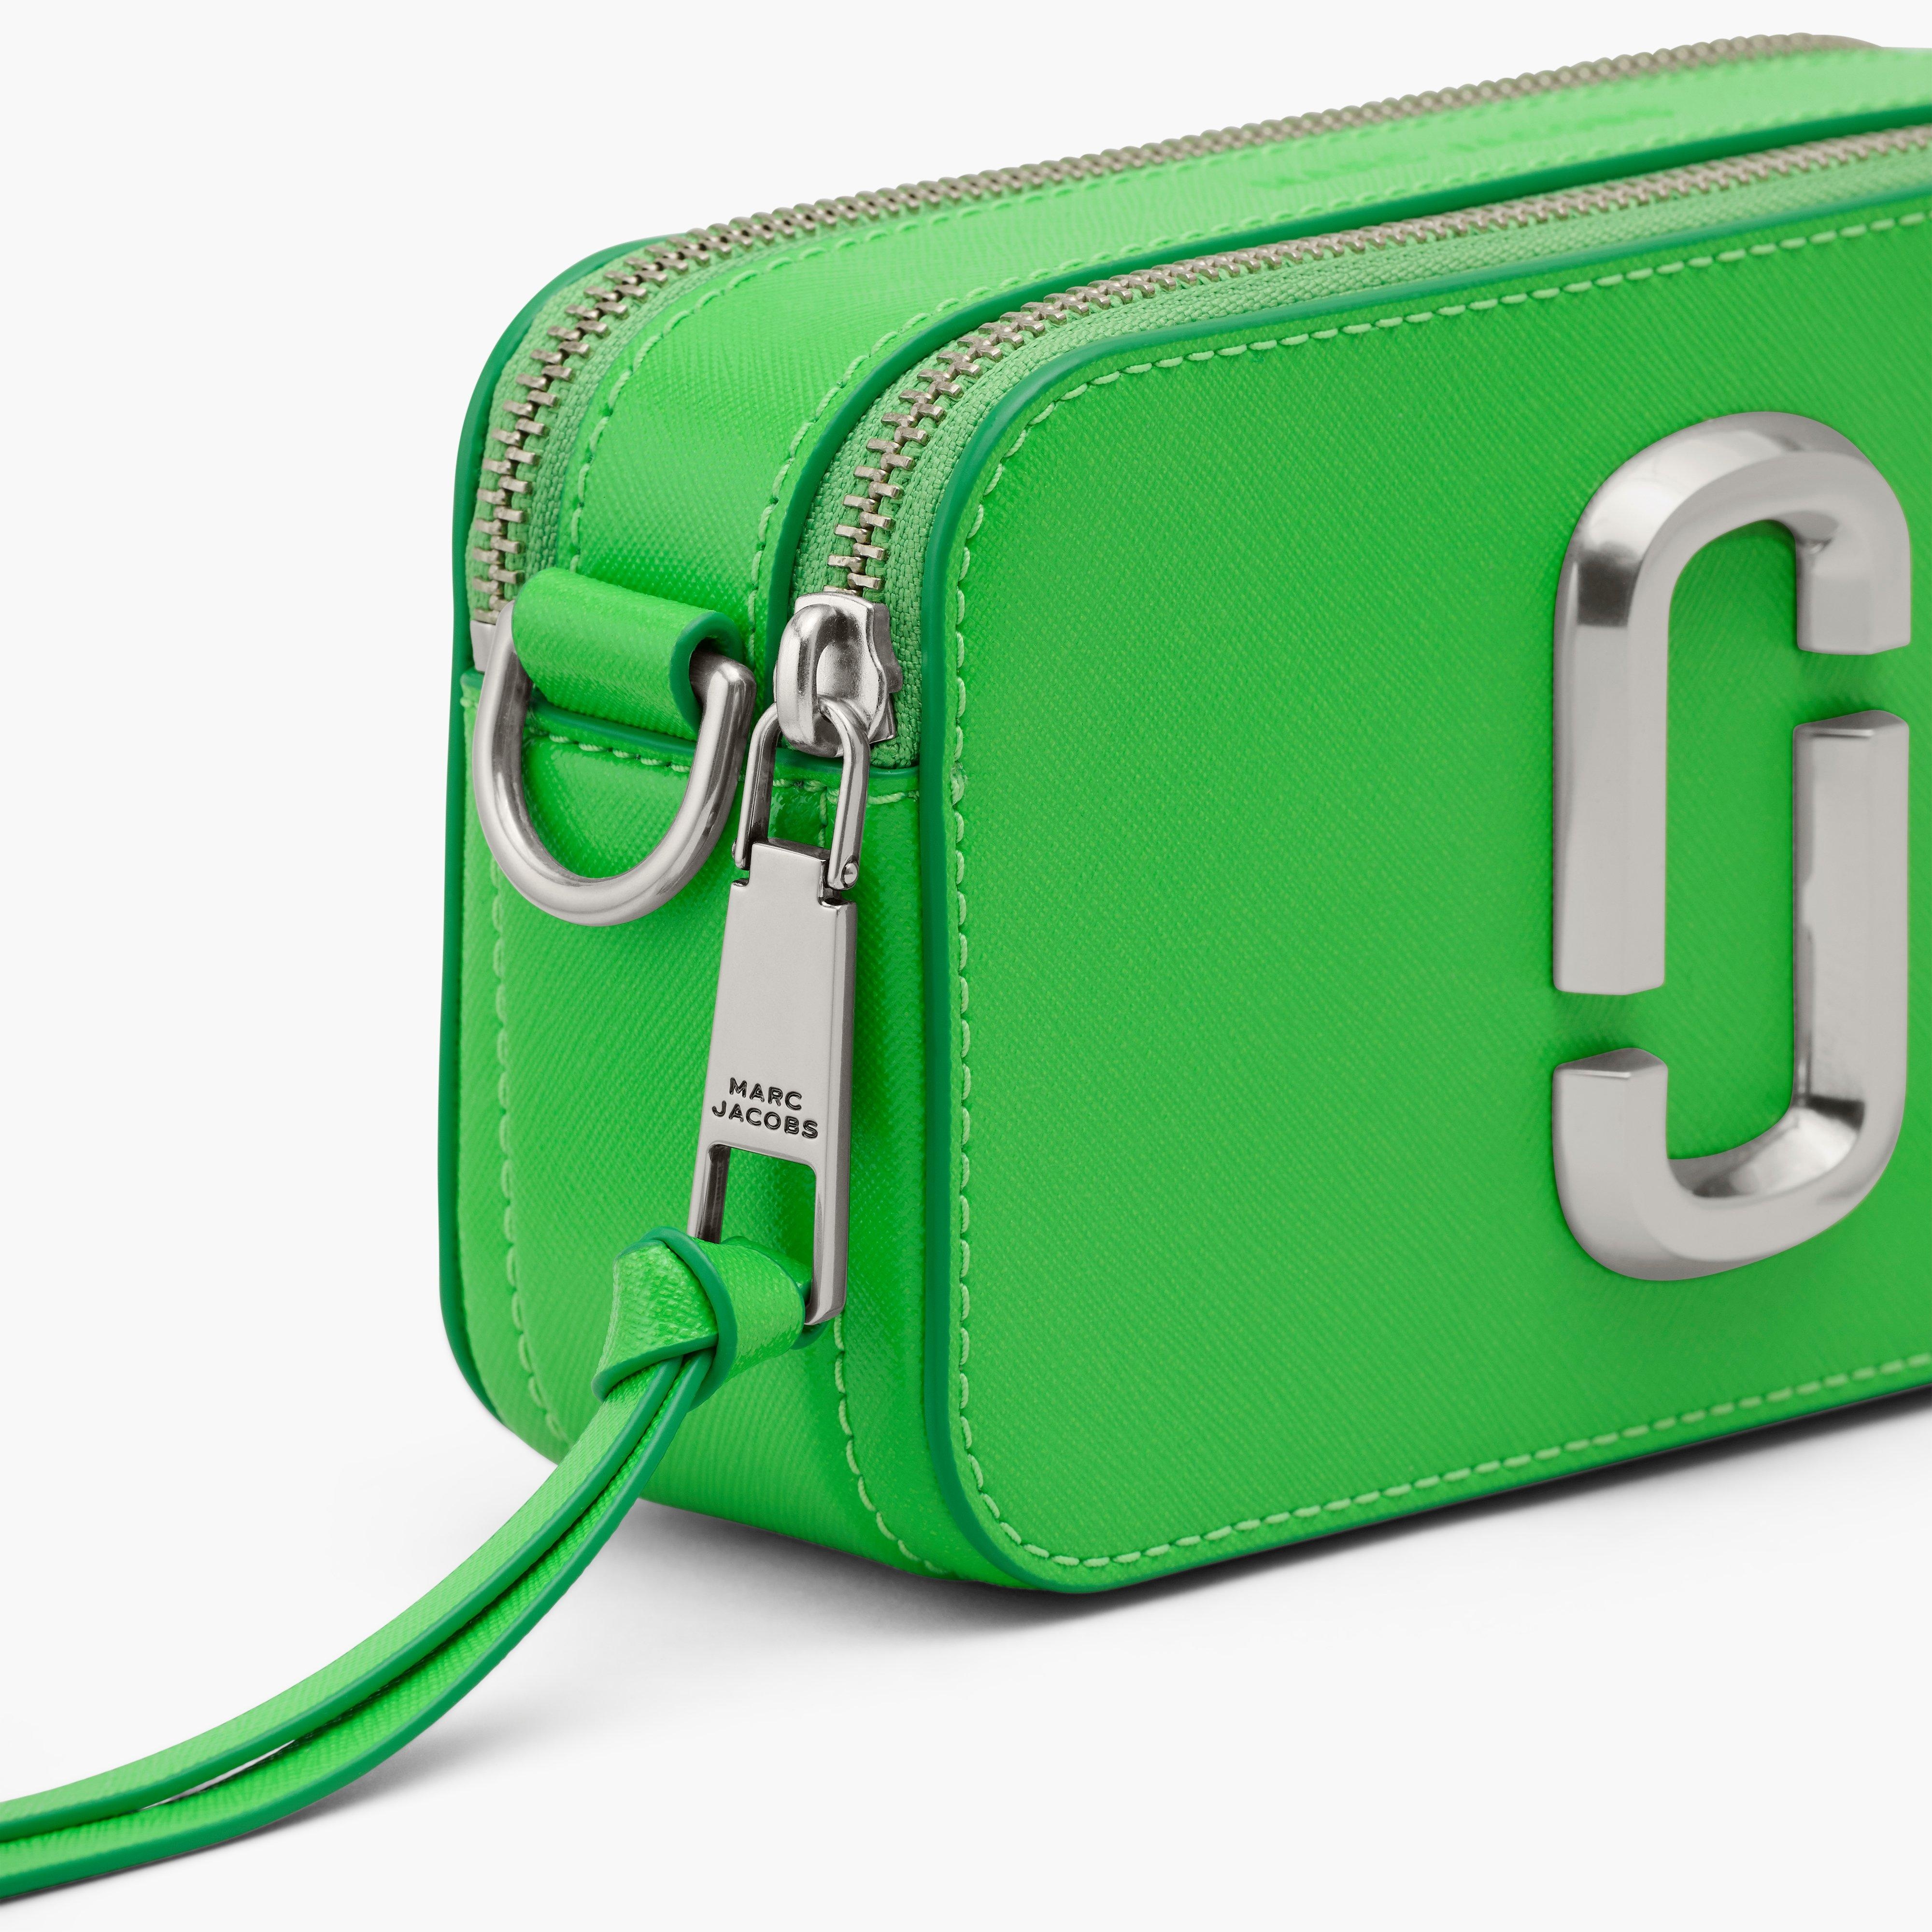 Marc Jacobs The Utility Snapshot Camera Bag